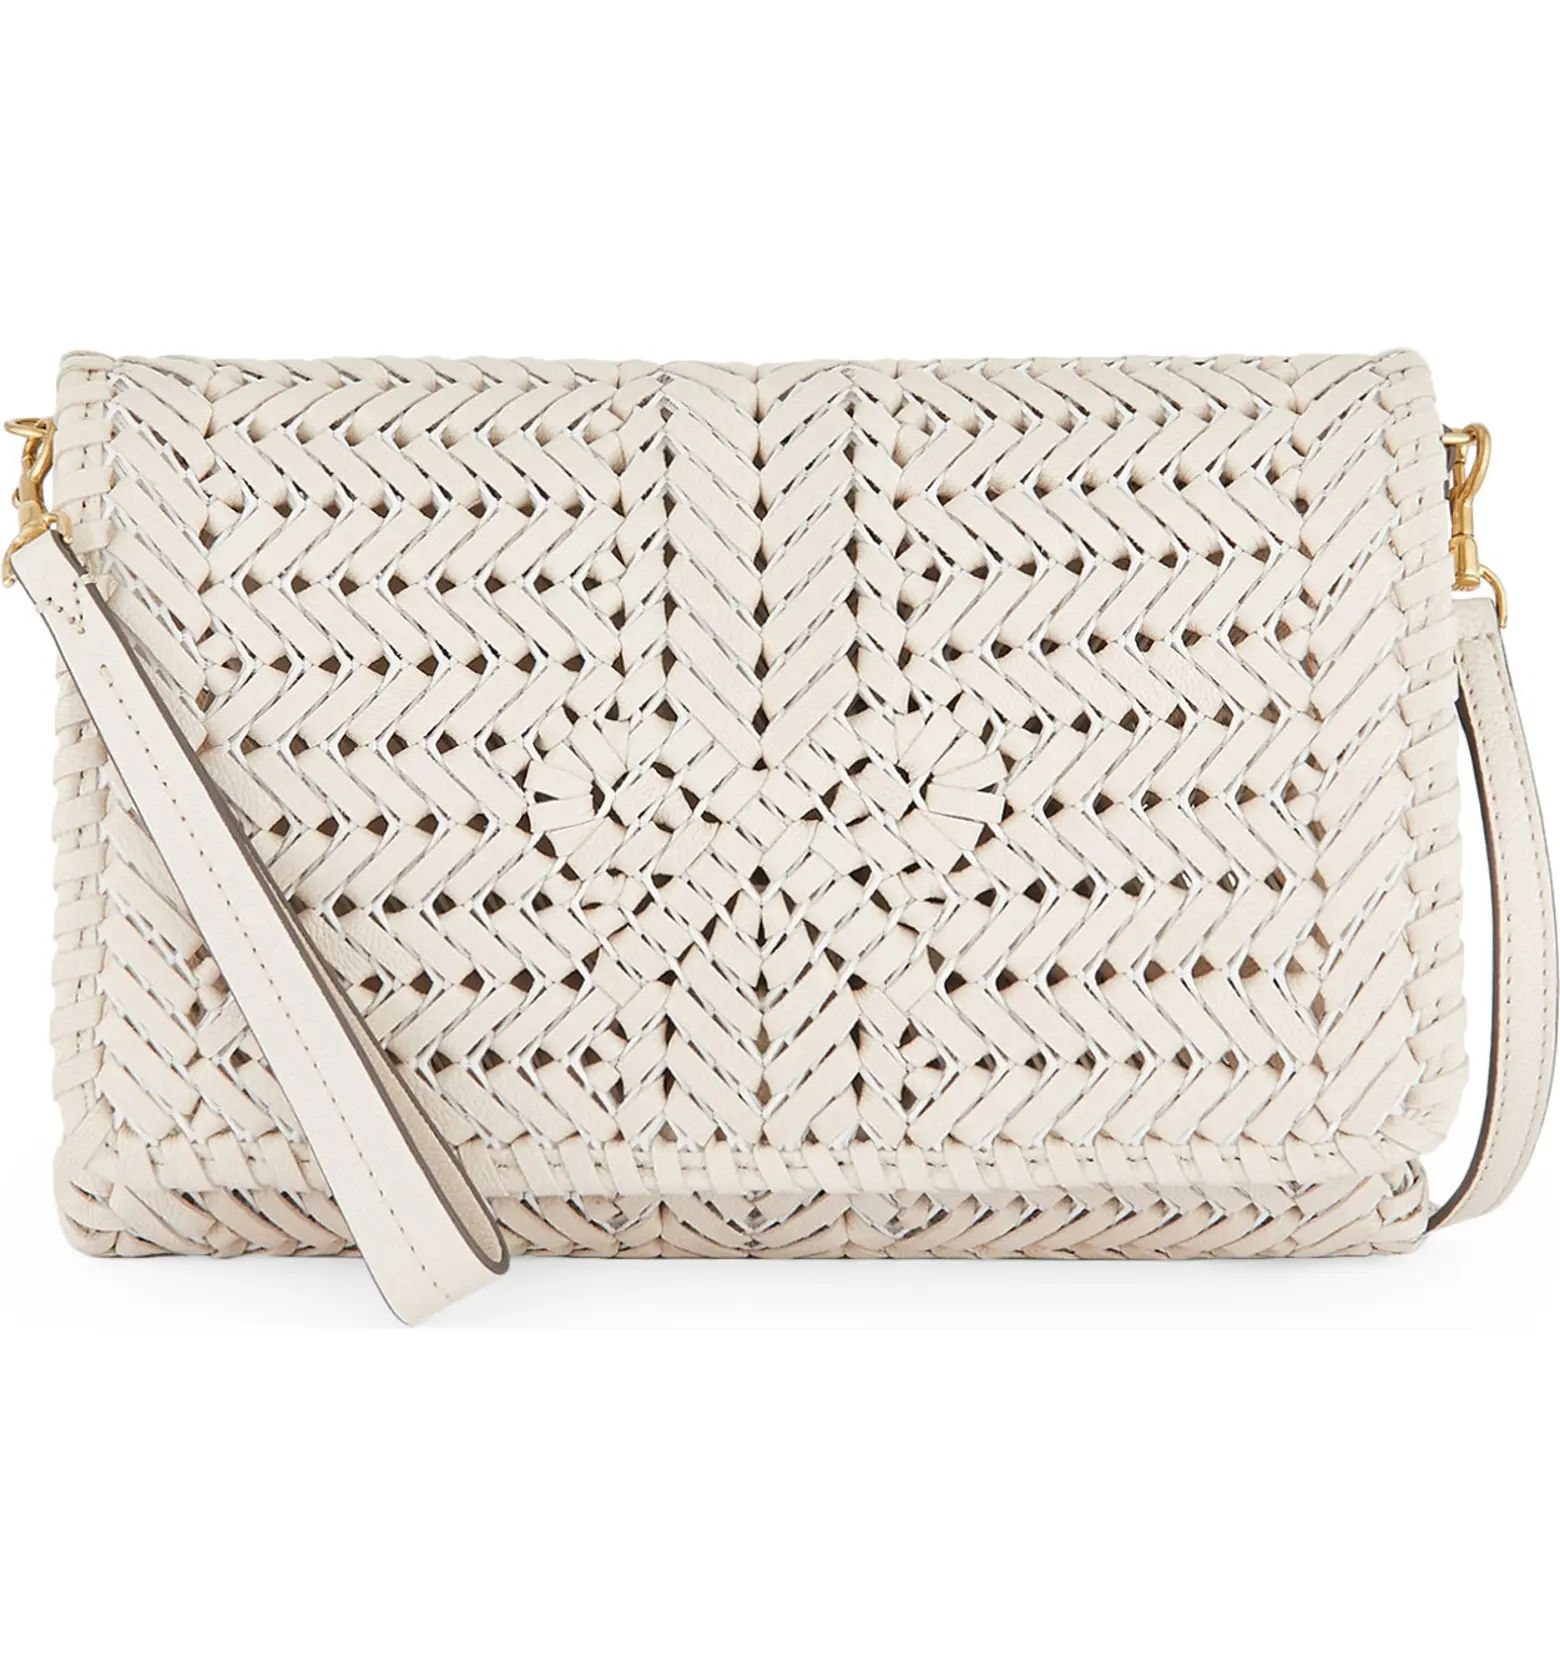 Anya Hindmarch The Neeson Woven Leather Crossbody Bag | Nordstrom | Nordstrom